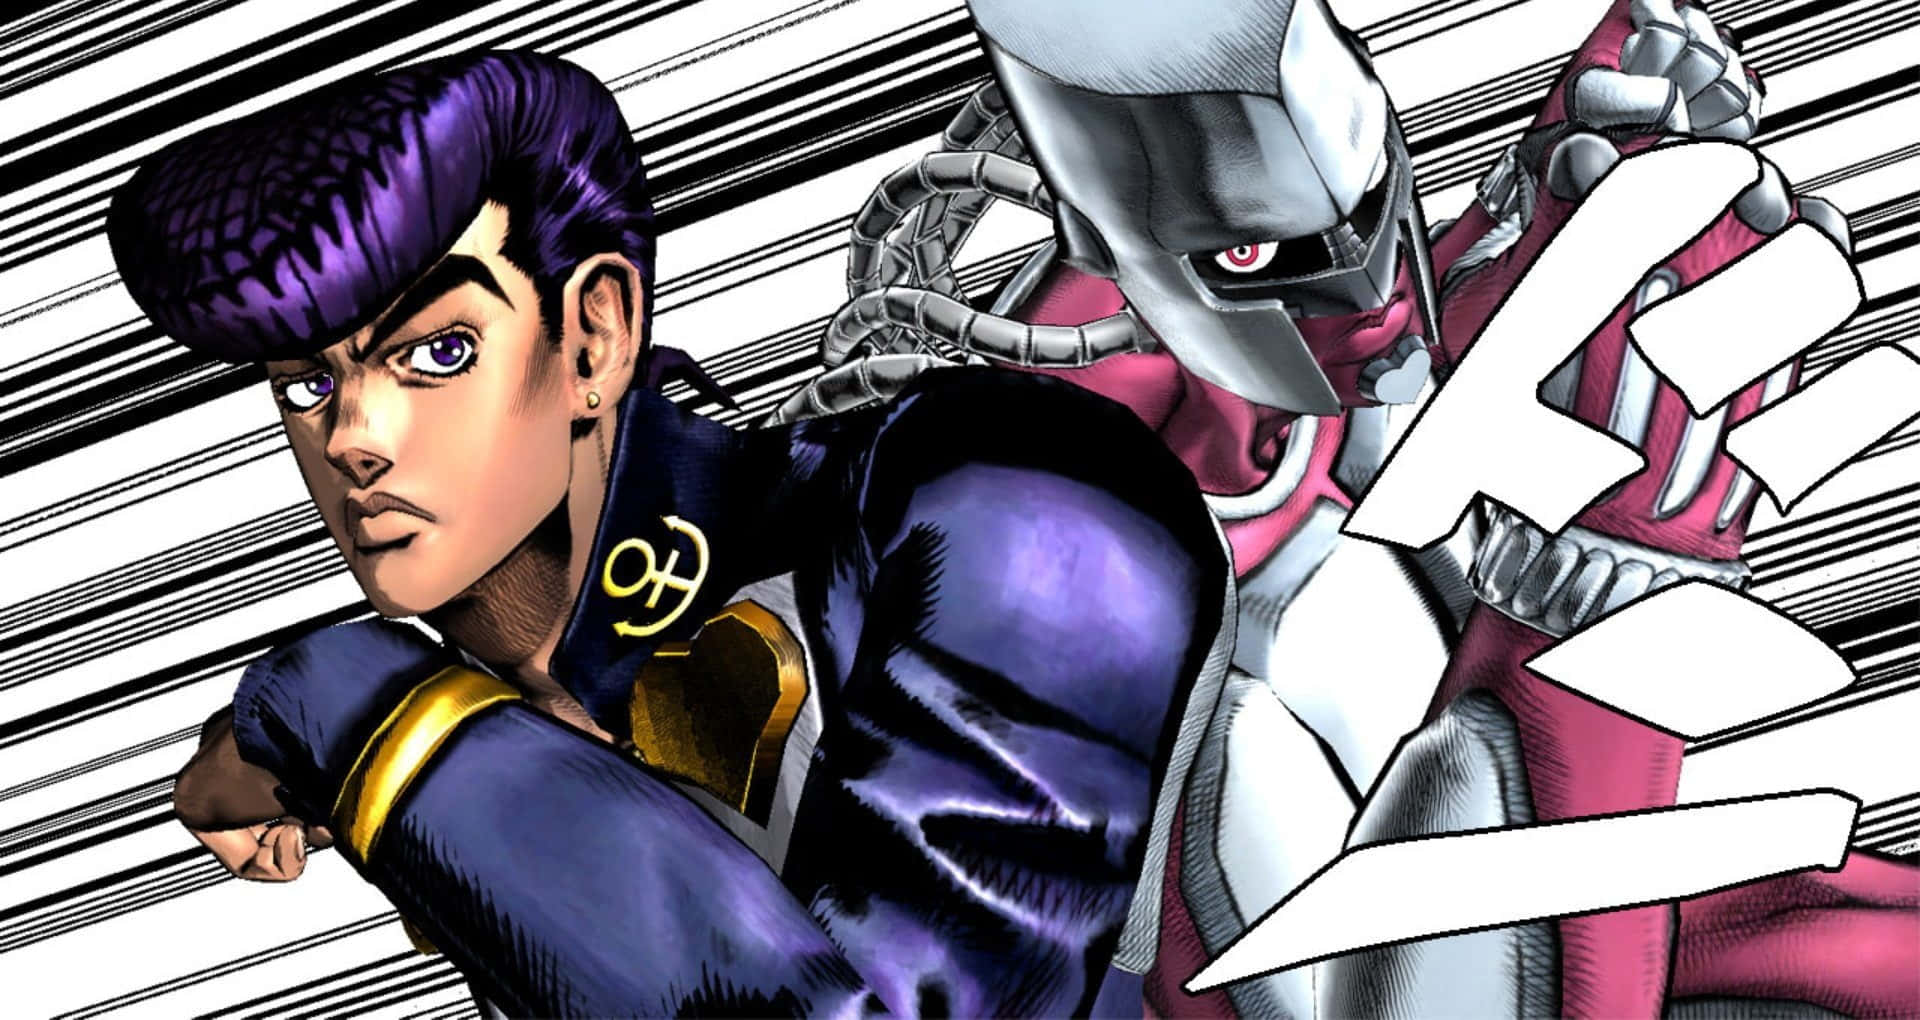 What do you think of Josuke in this Pose?